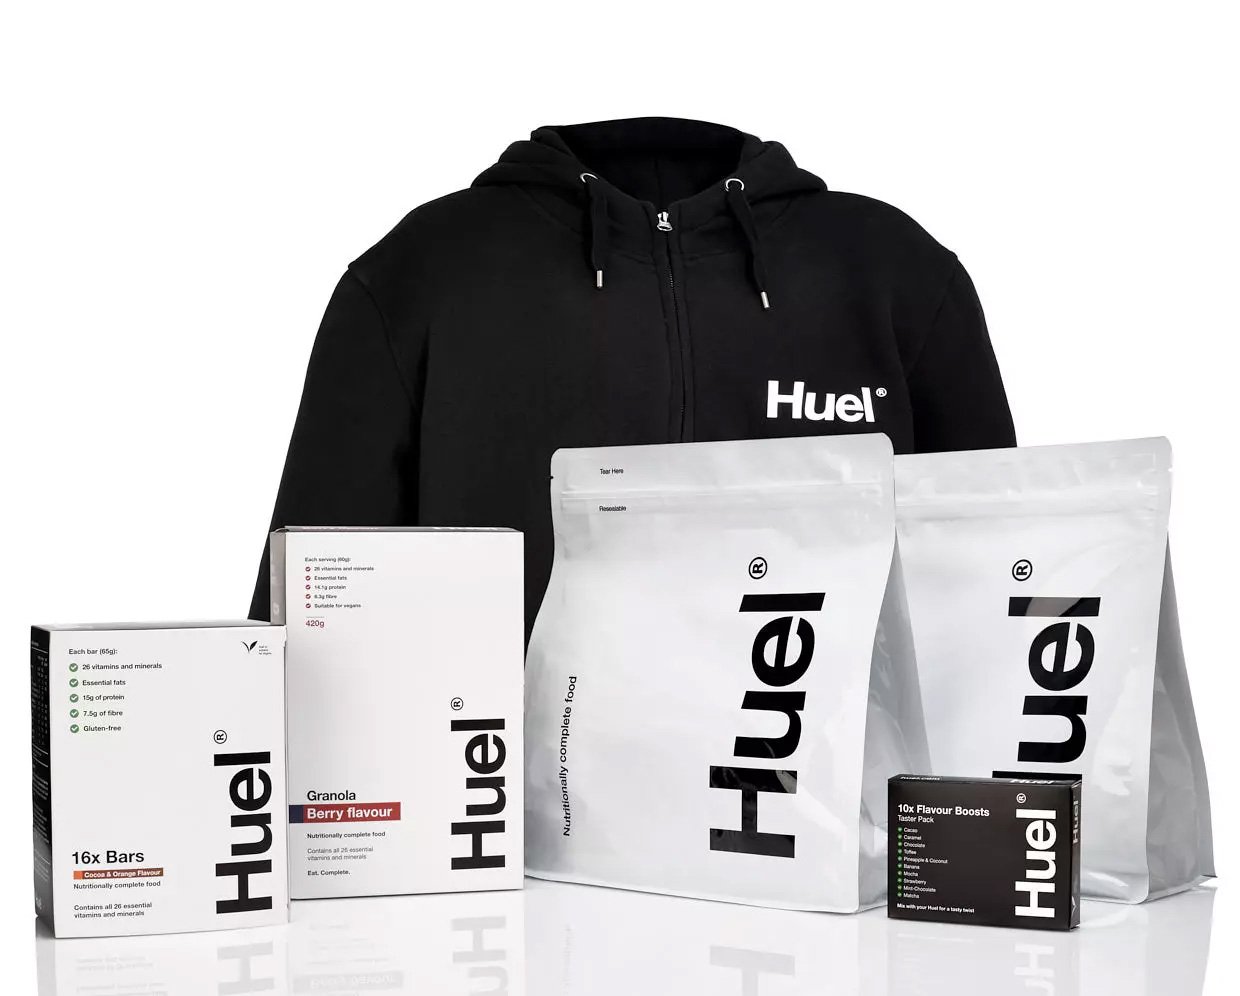 Huel product photography